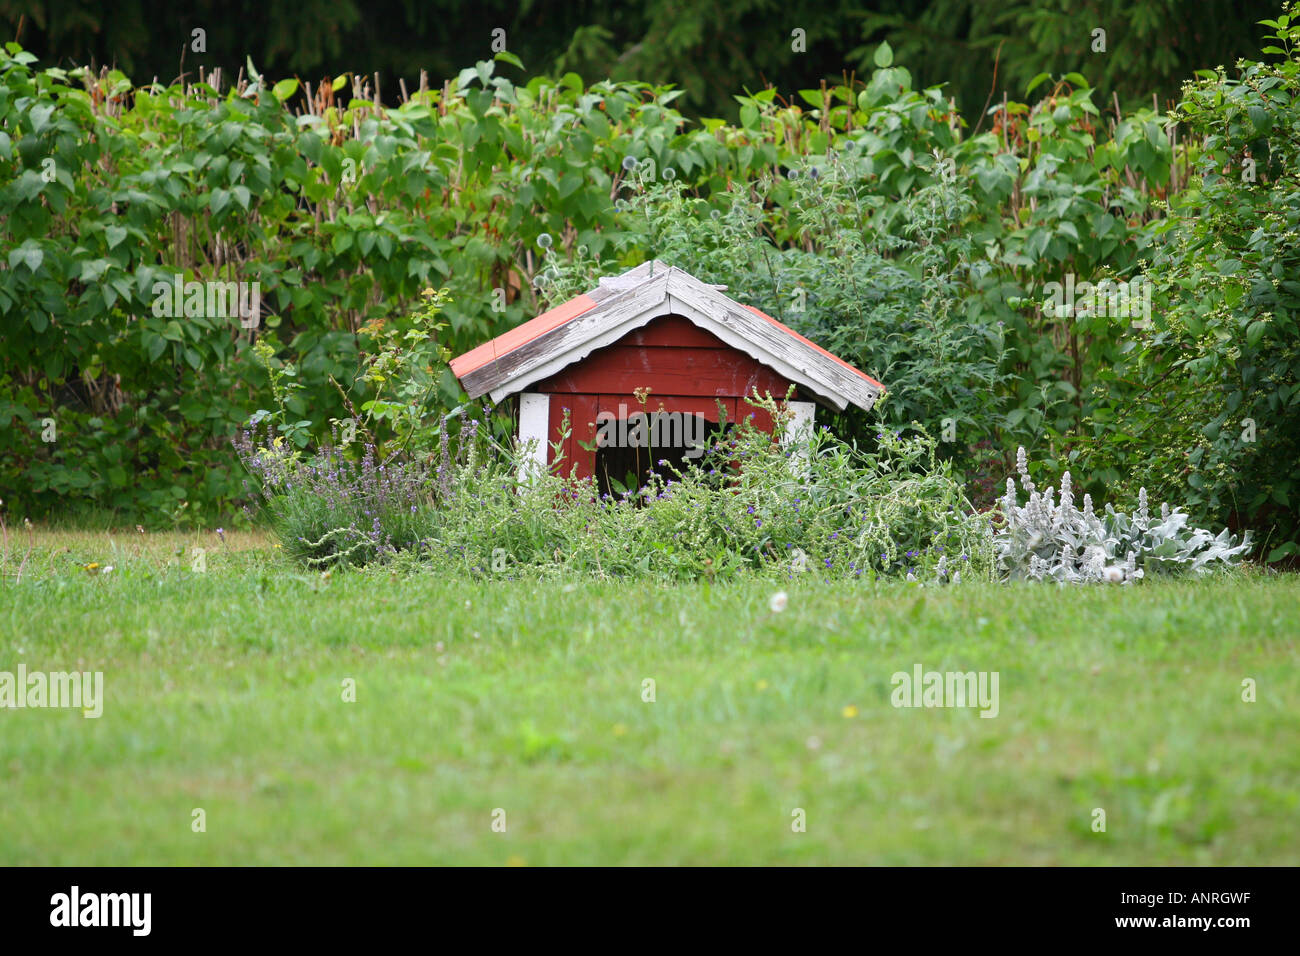 Doghouse in the garden Stock Photo